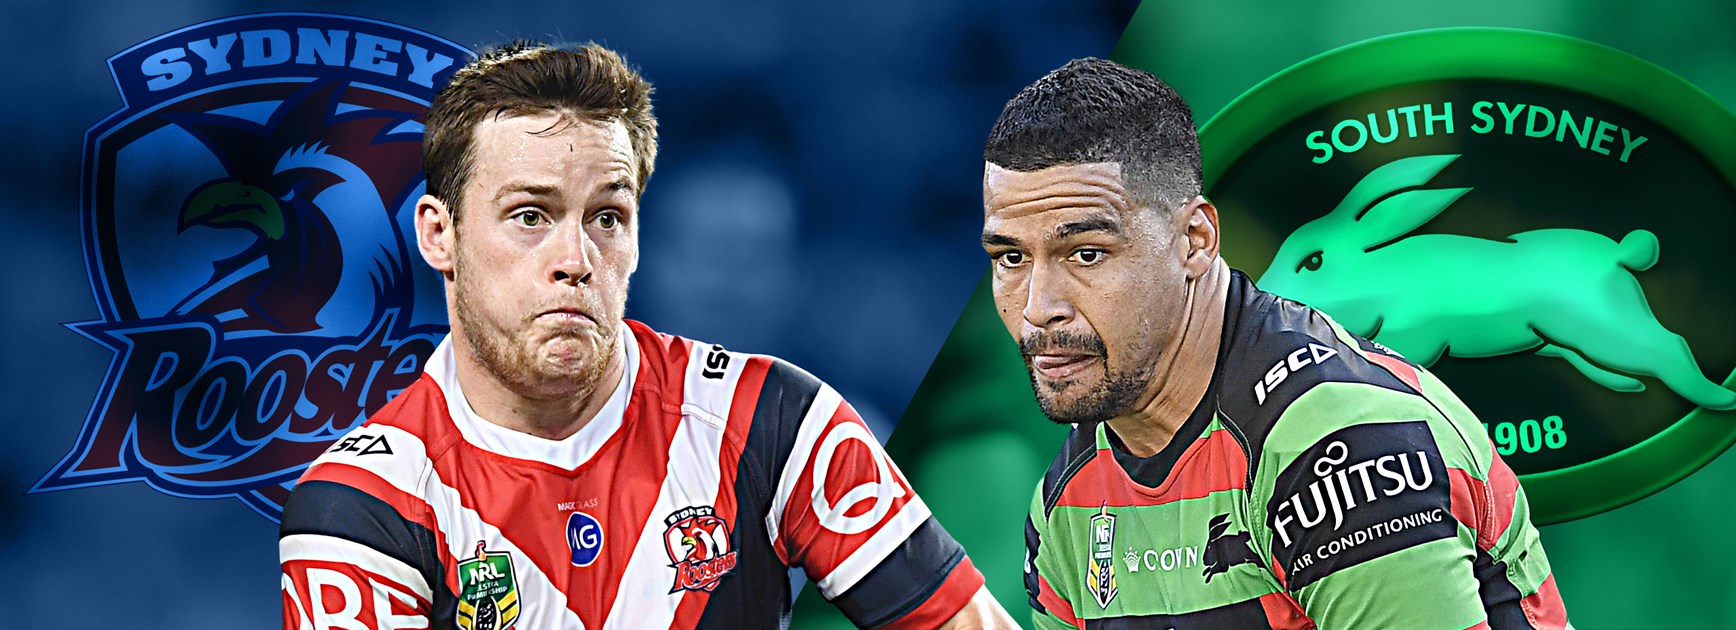 Roosters v Rabbitohs: Kennar returns; Roosters unchanged